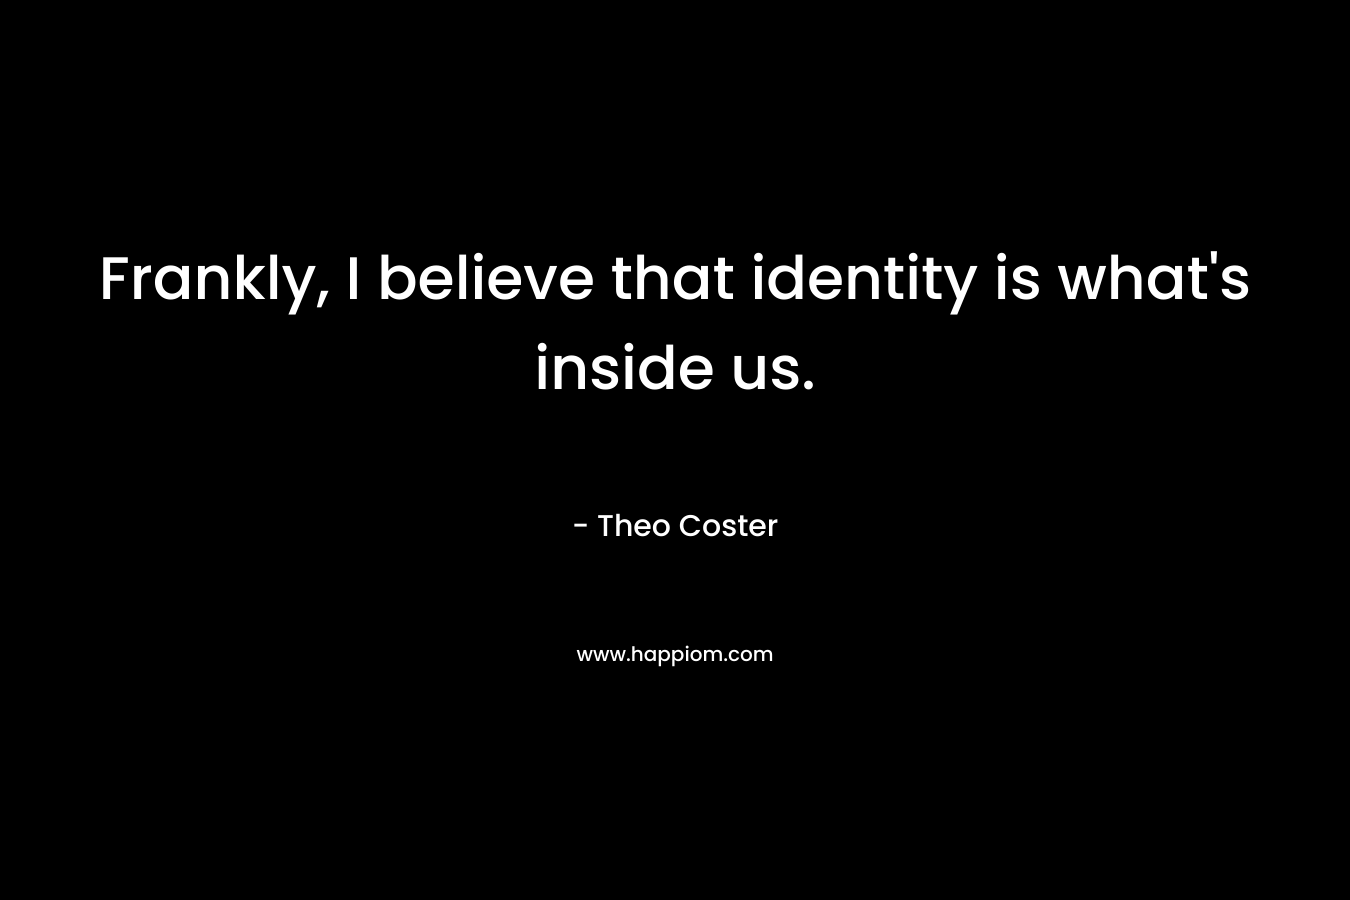 Frankly, I believe that identity is what’s inside us. – Theo Coster